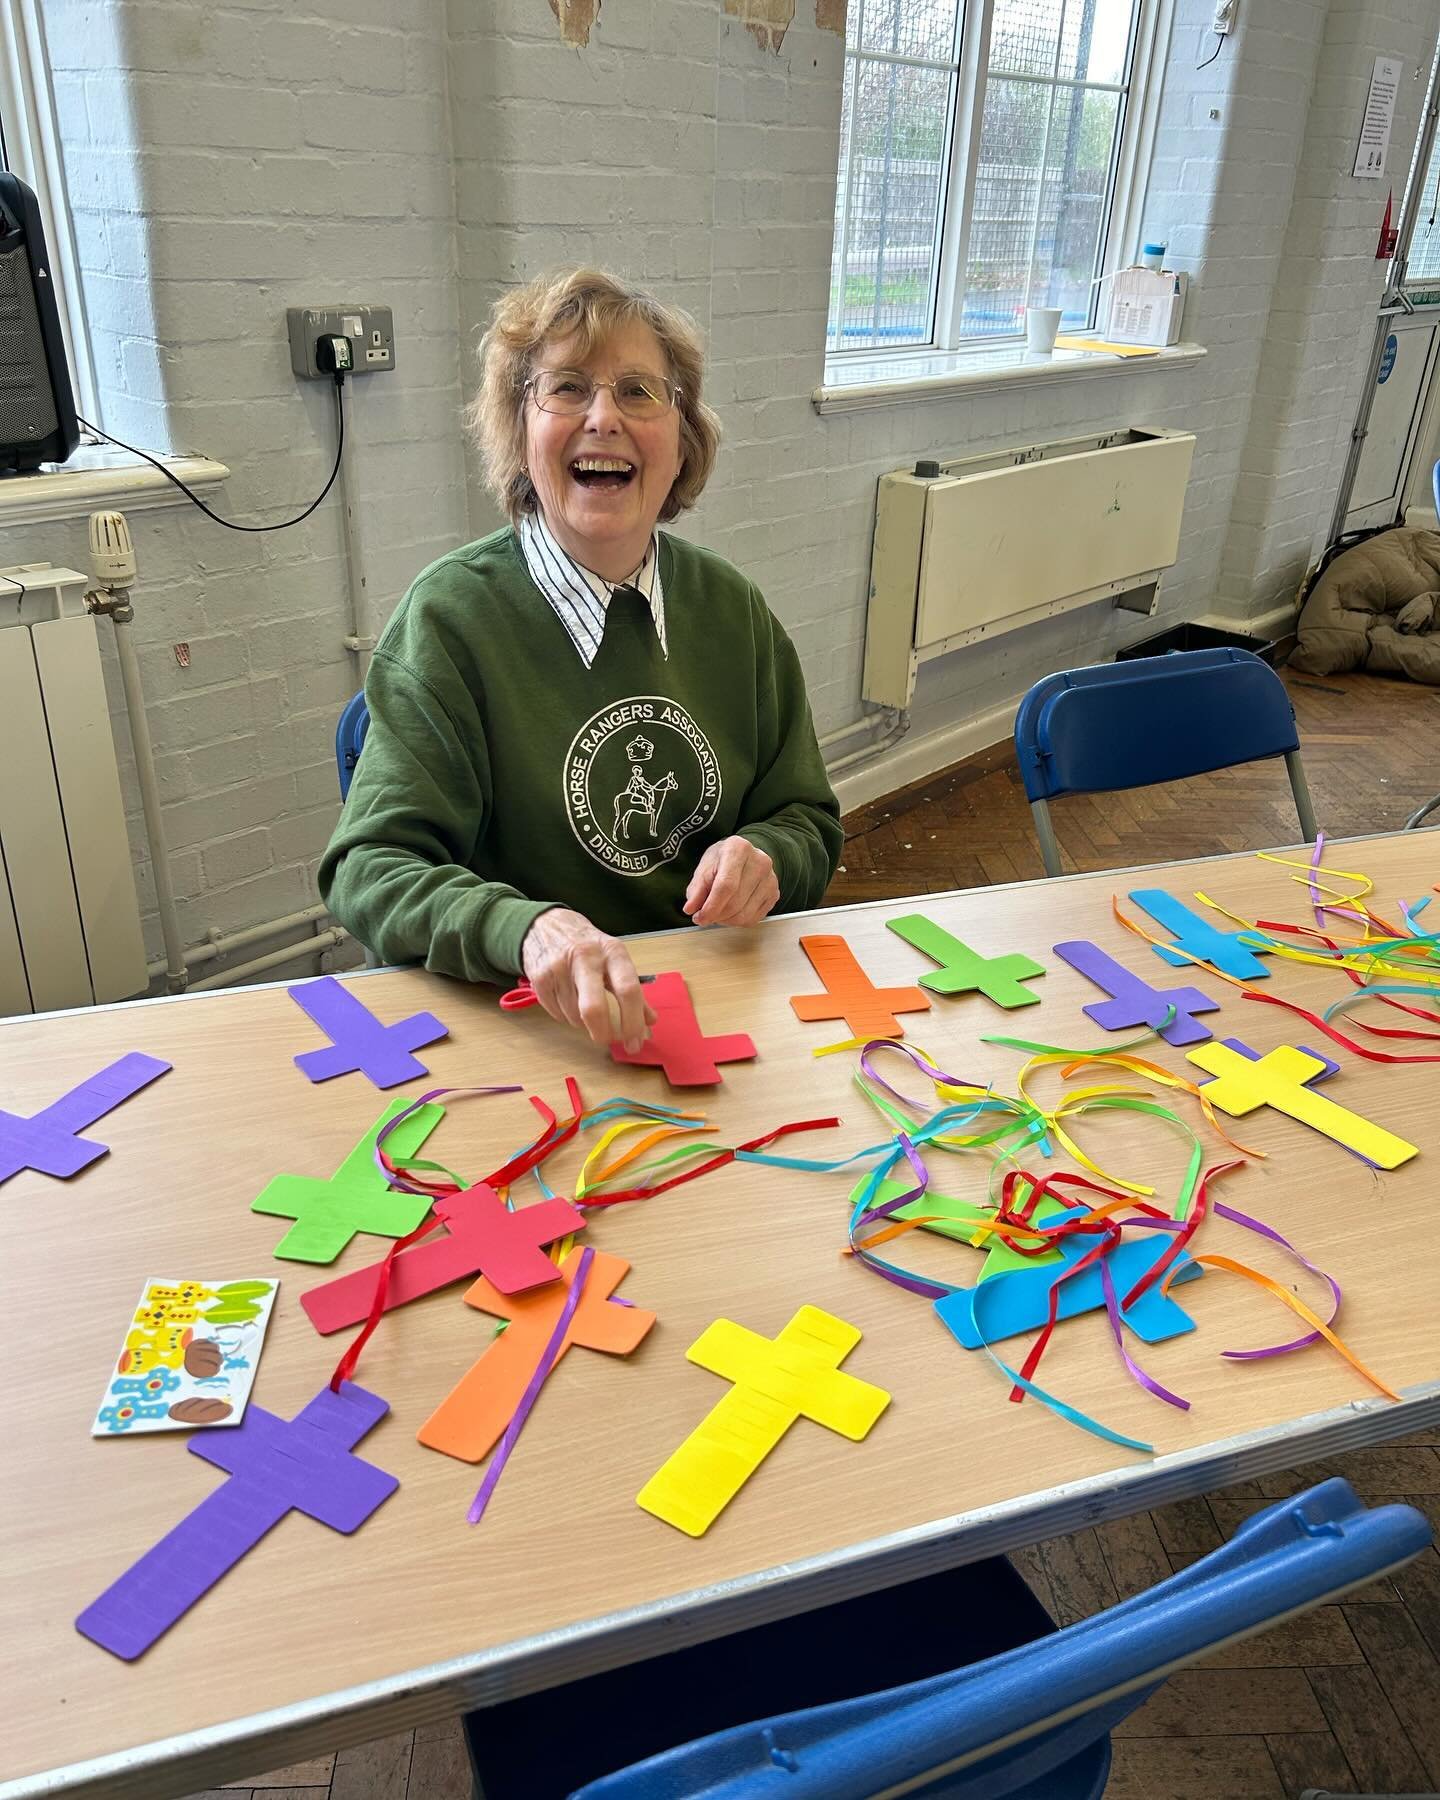 It&rsquo;s Messy Church tomorrow!
Come along in Wednesday 24th April from 3.30pm for messy crafts, singing, a story from the Bible, food and fun! It&rsquo;s for children either an adult and is at the St Peter&rsquo;s Community and Youth Hub, Ray Road